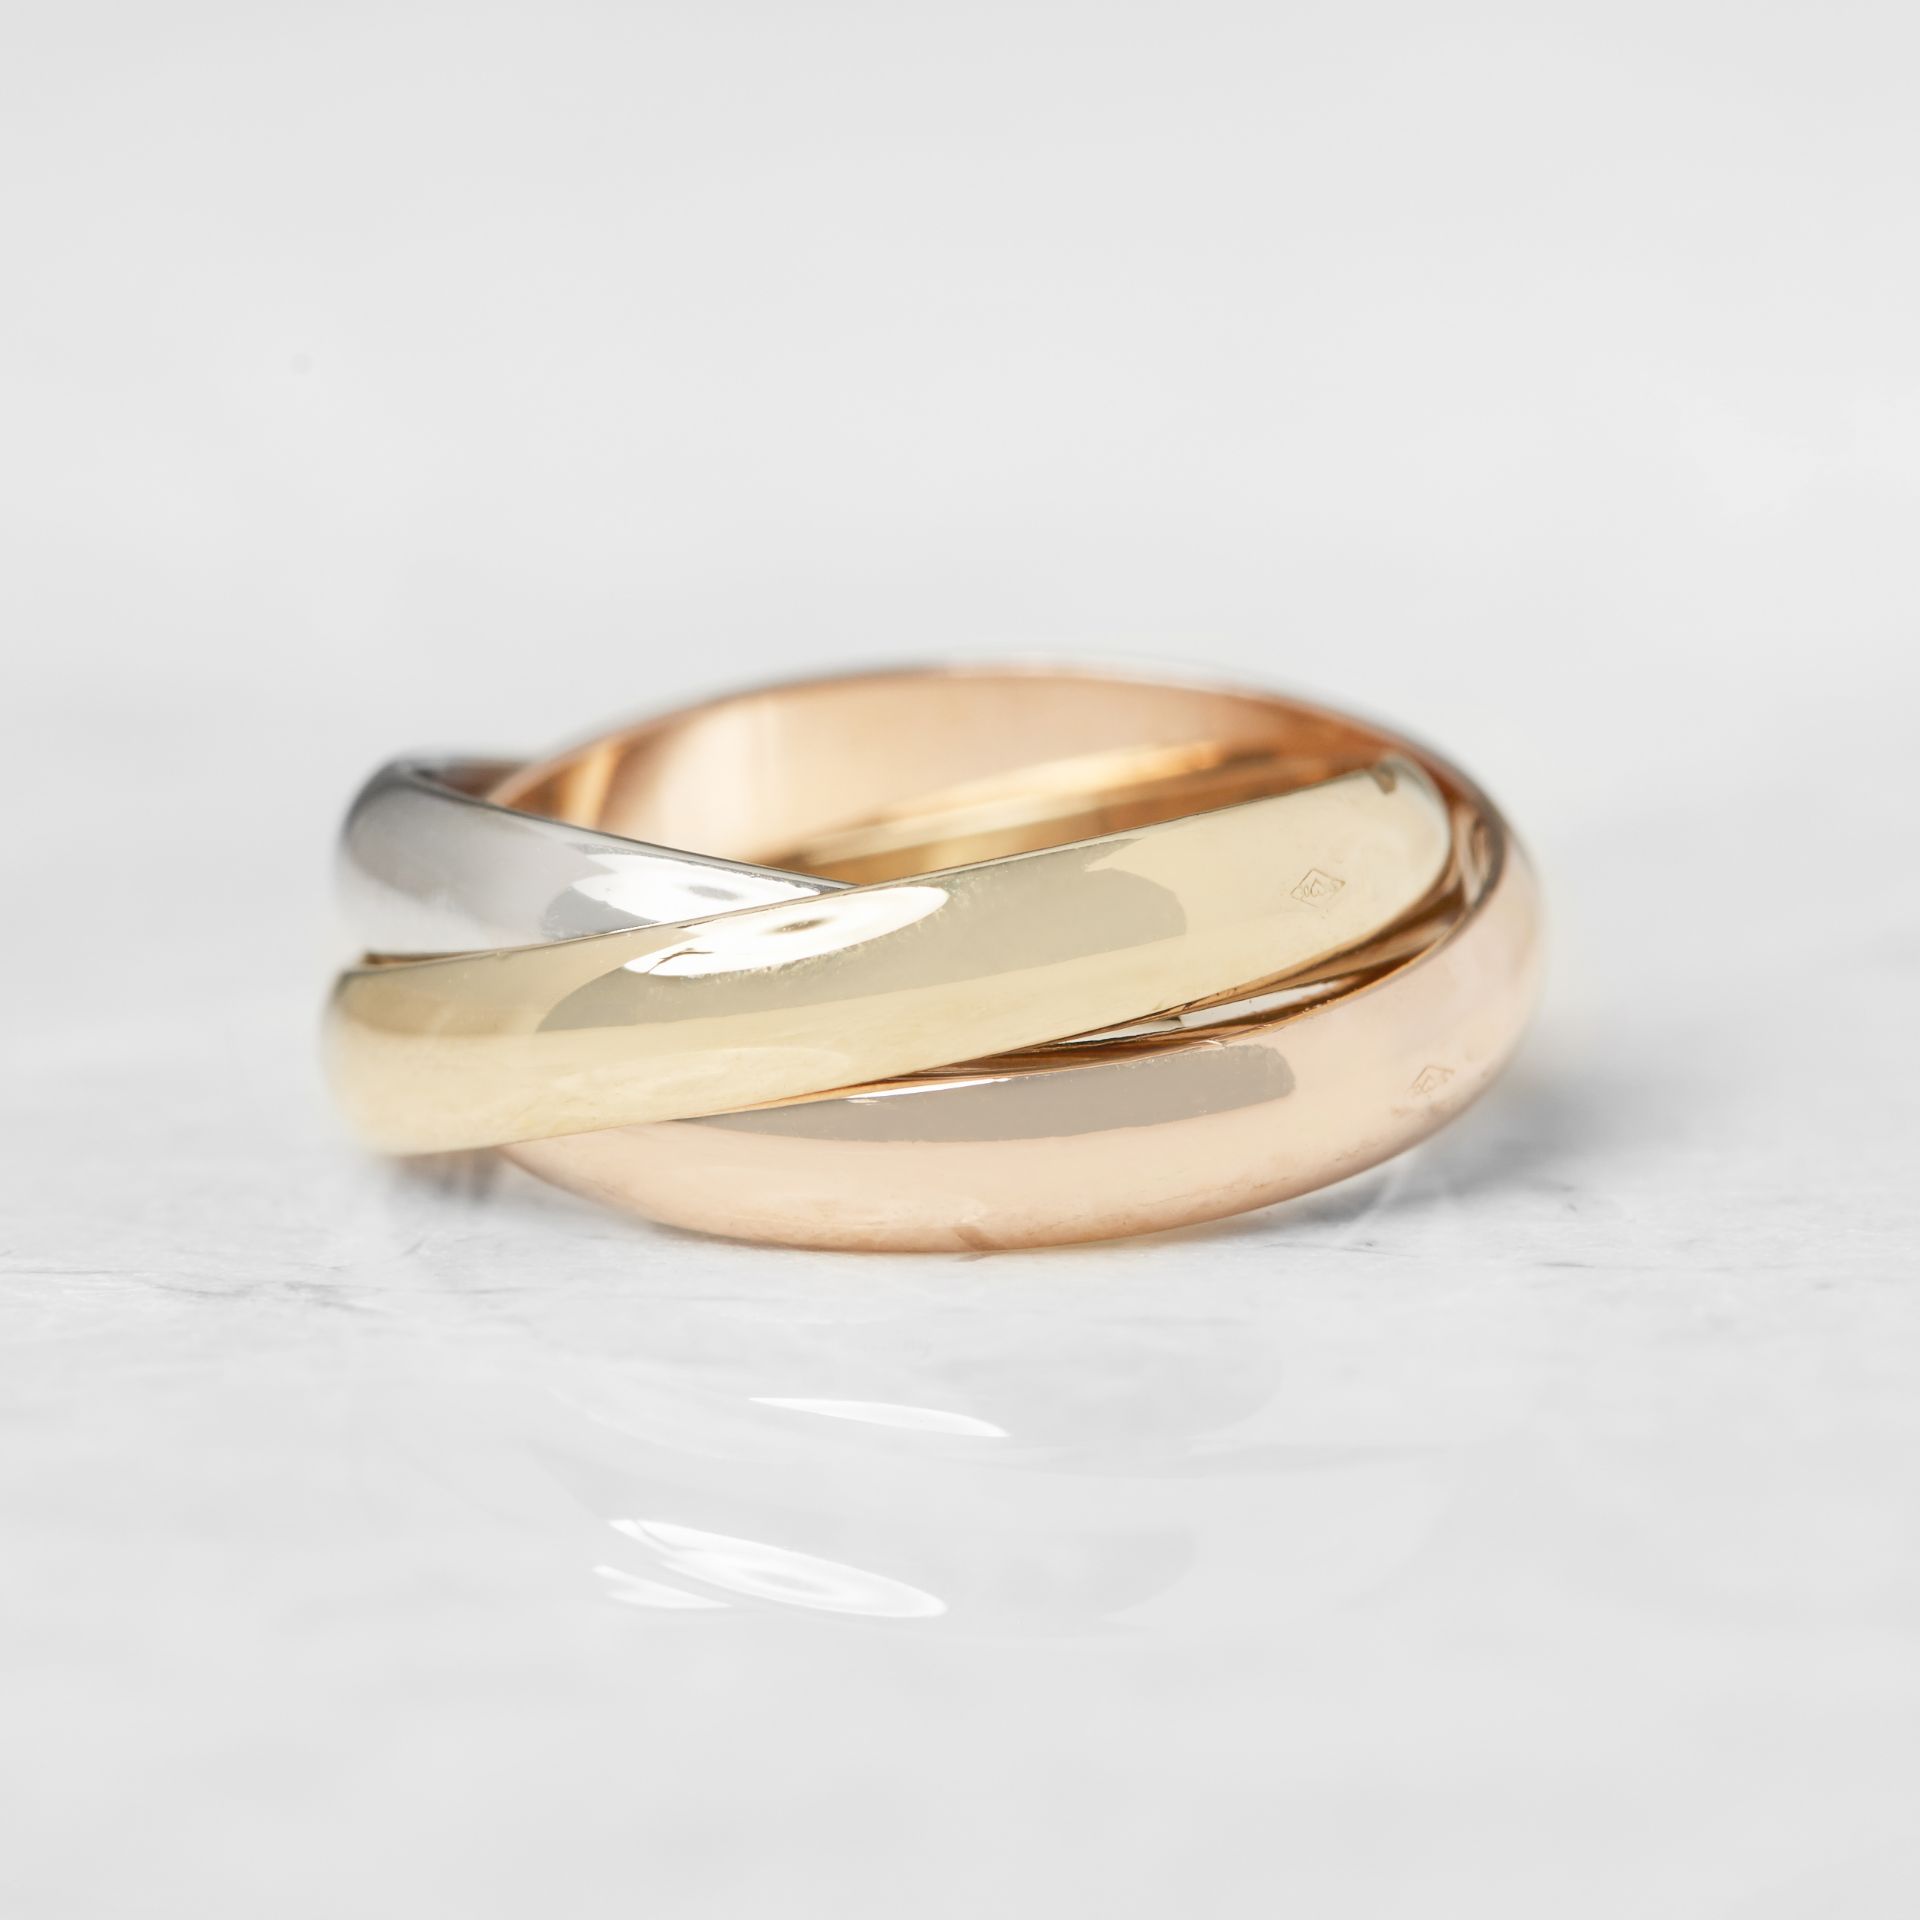 Cartier 18k Yellow, White & Rose Gold Trinity Ring - Image 7 of 18